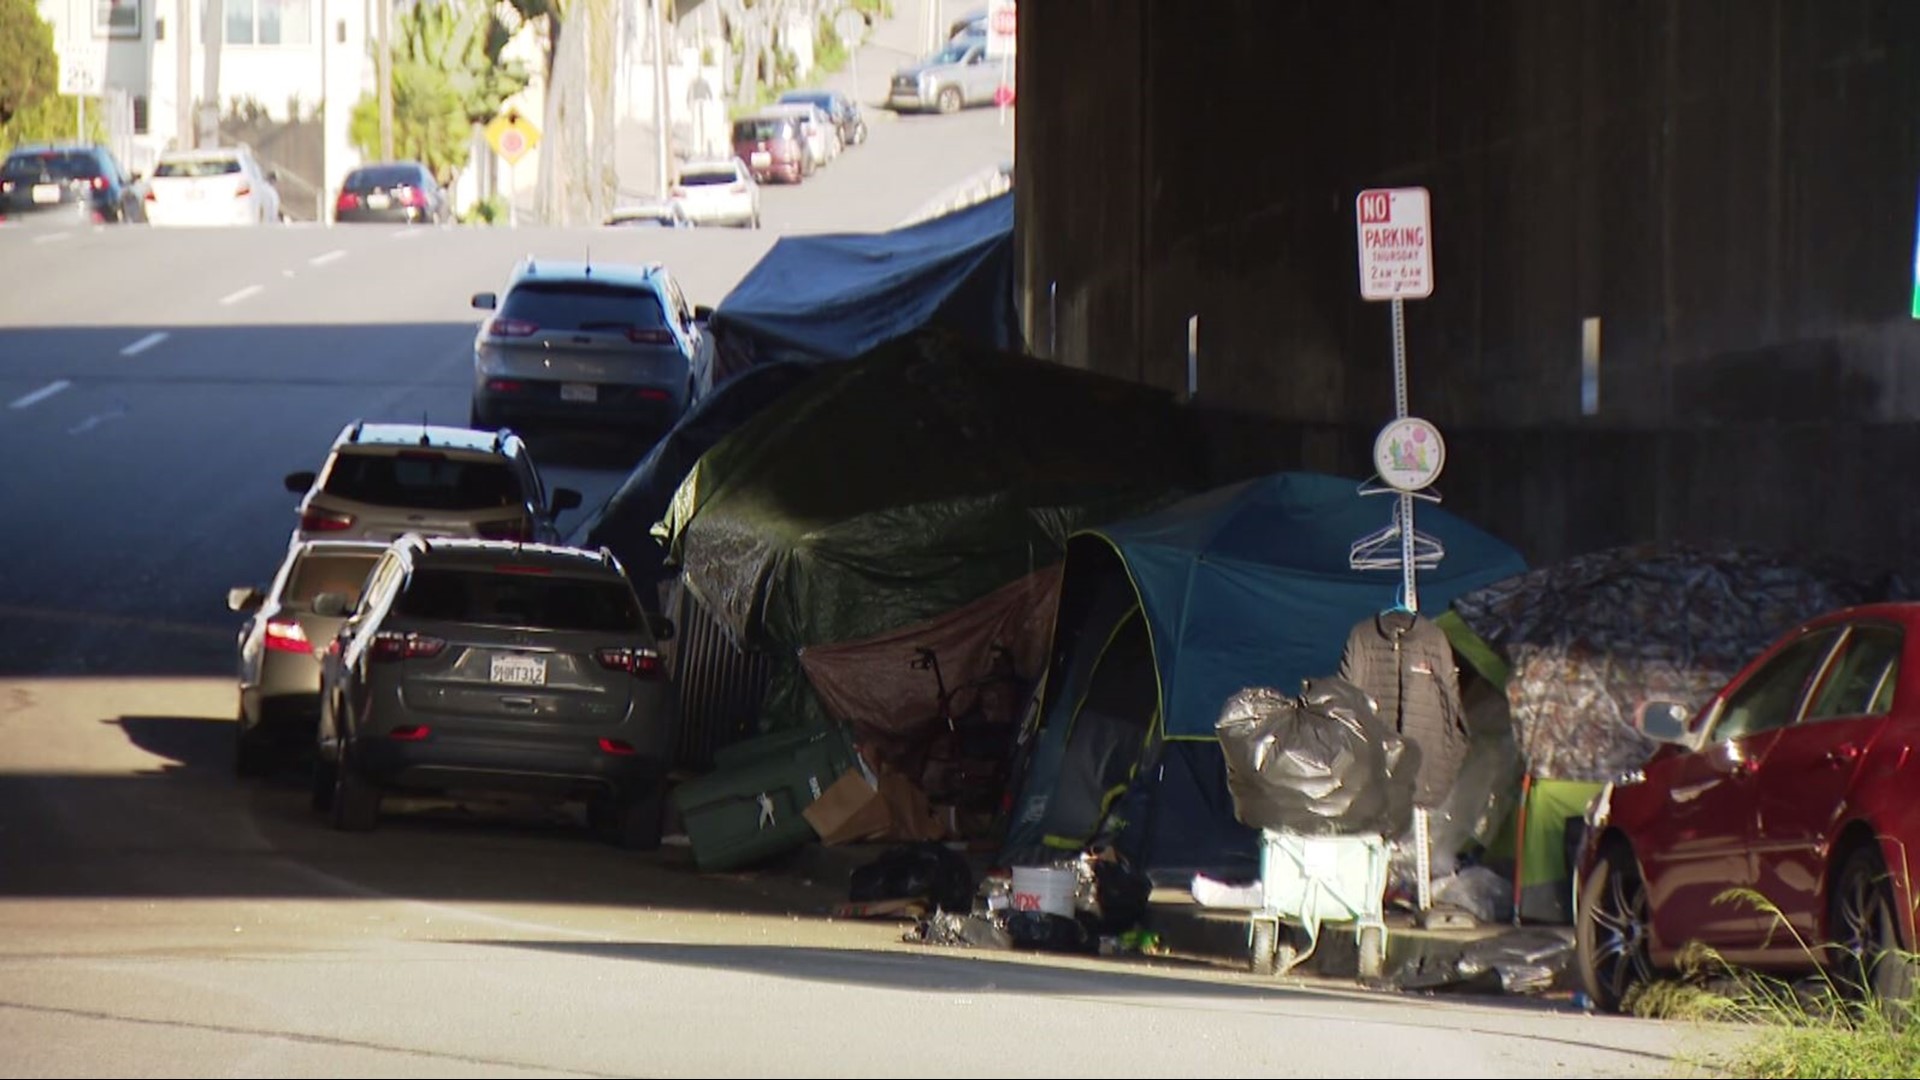 Residents report a growing number of homeless encampments around Grape Street.